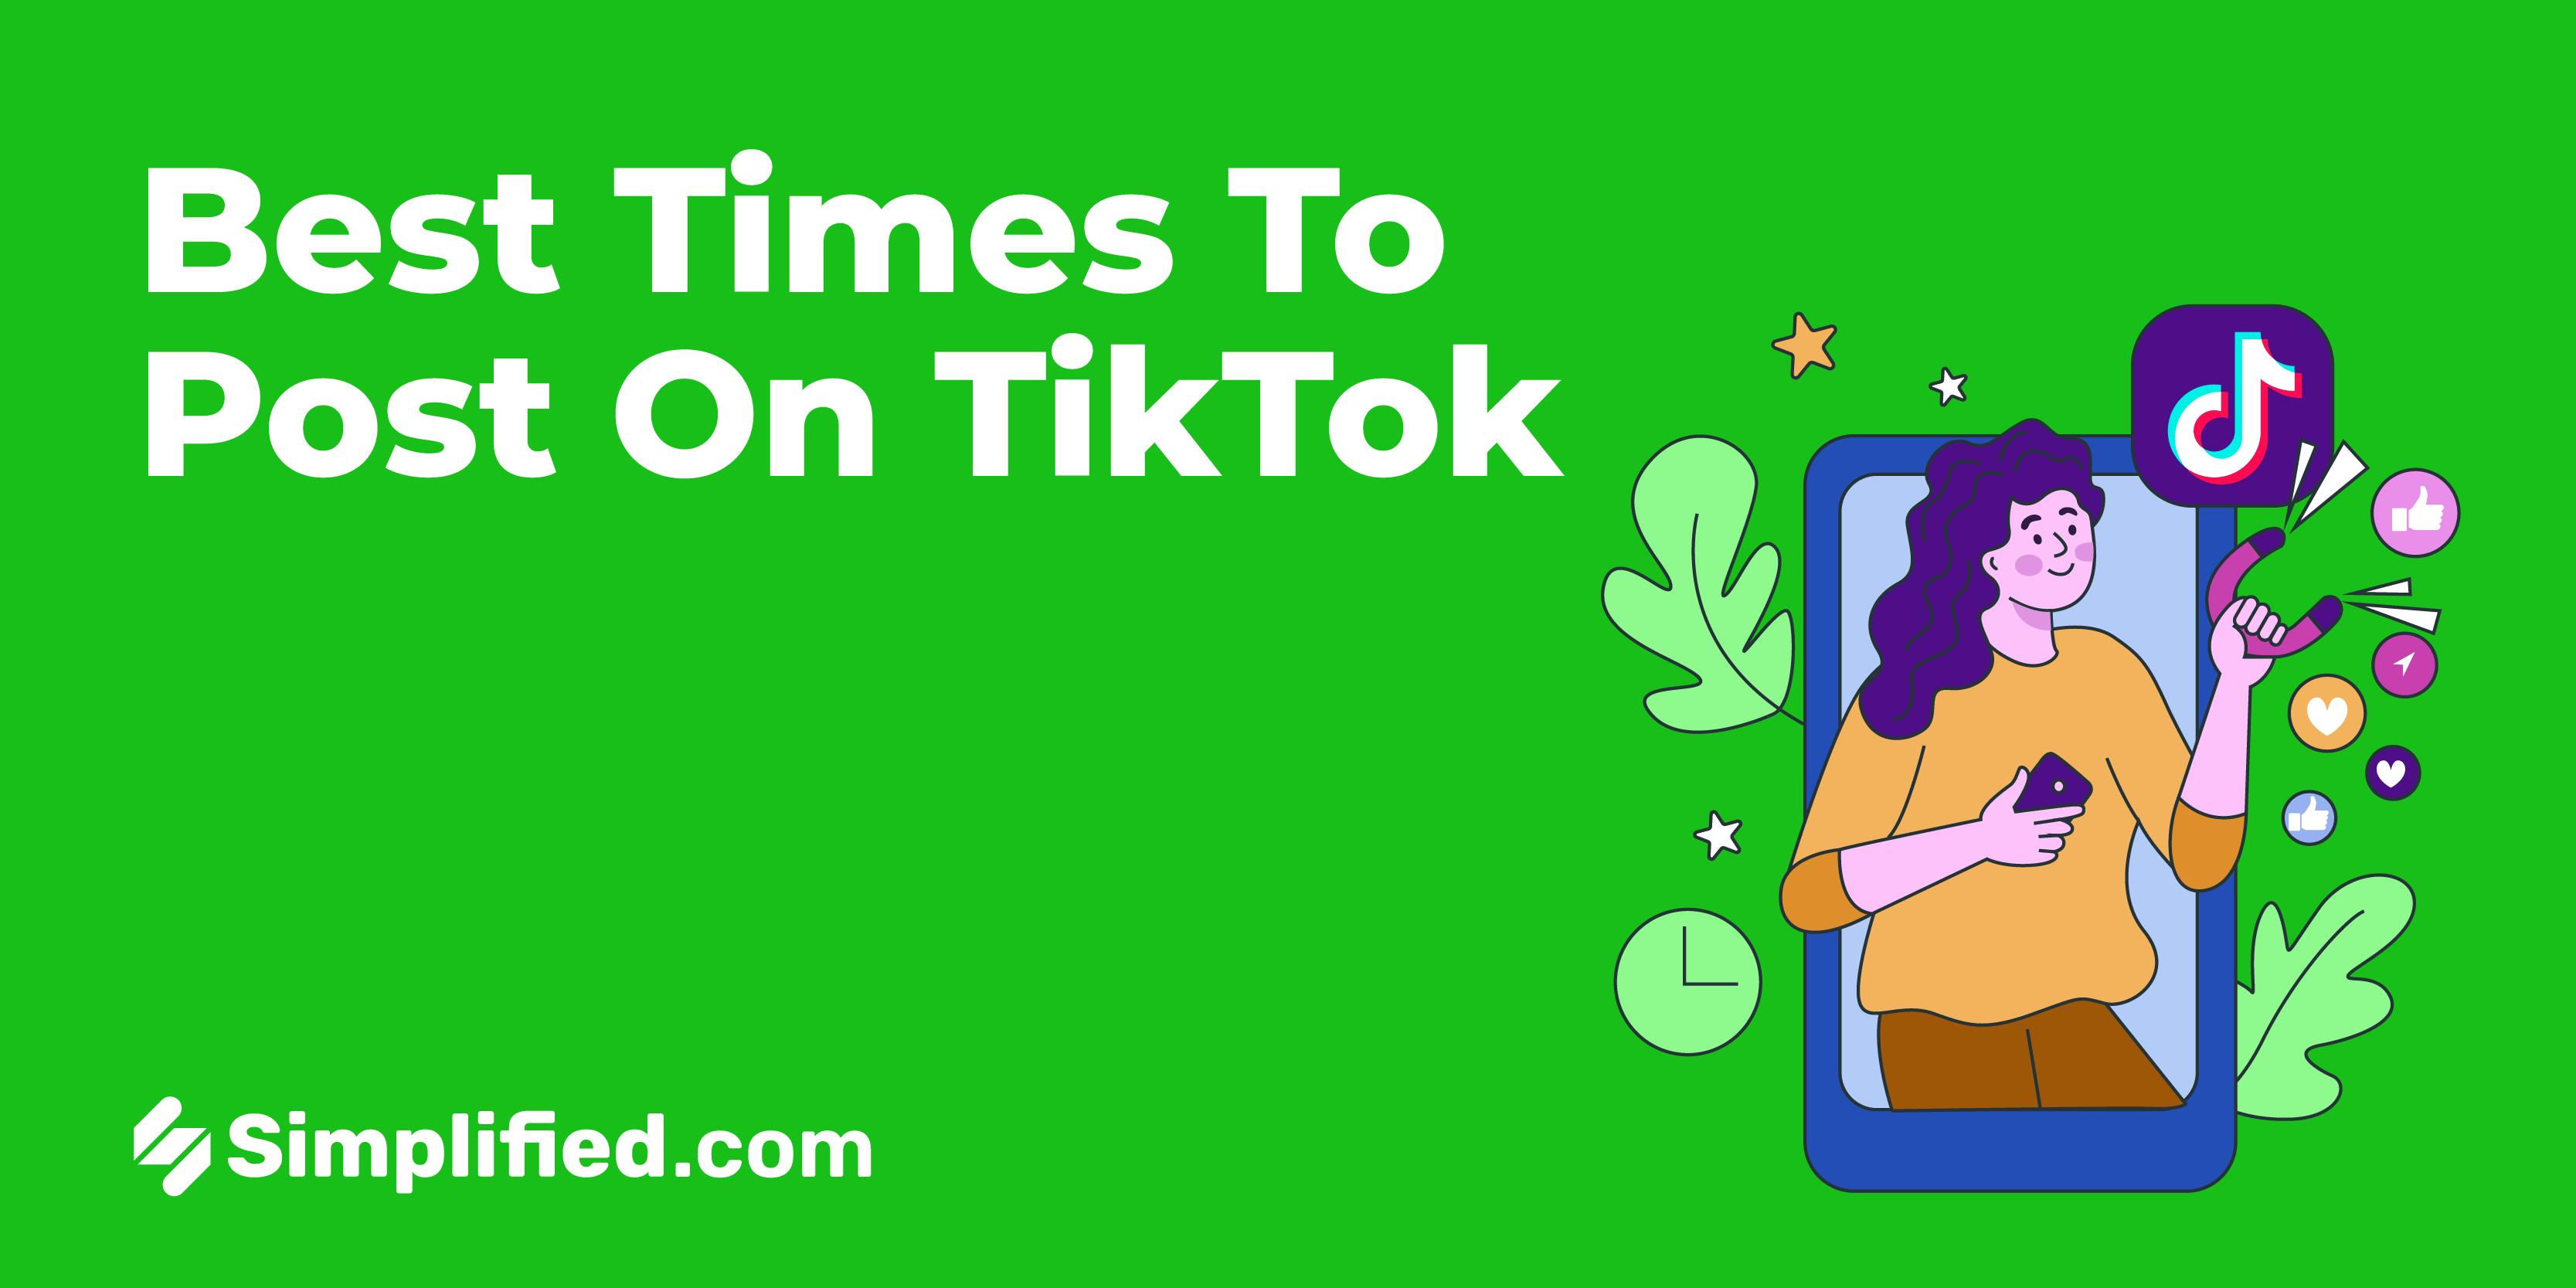 https://siteimages.simplified.com/blog/Best-Times-to-Post-on-TikTok-01.png?auto=compress&fm=png